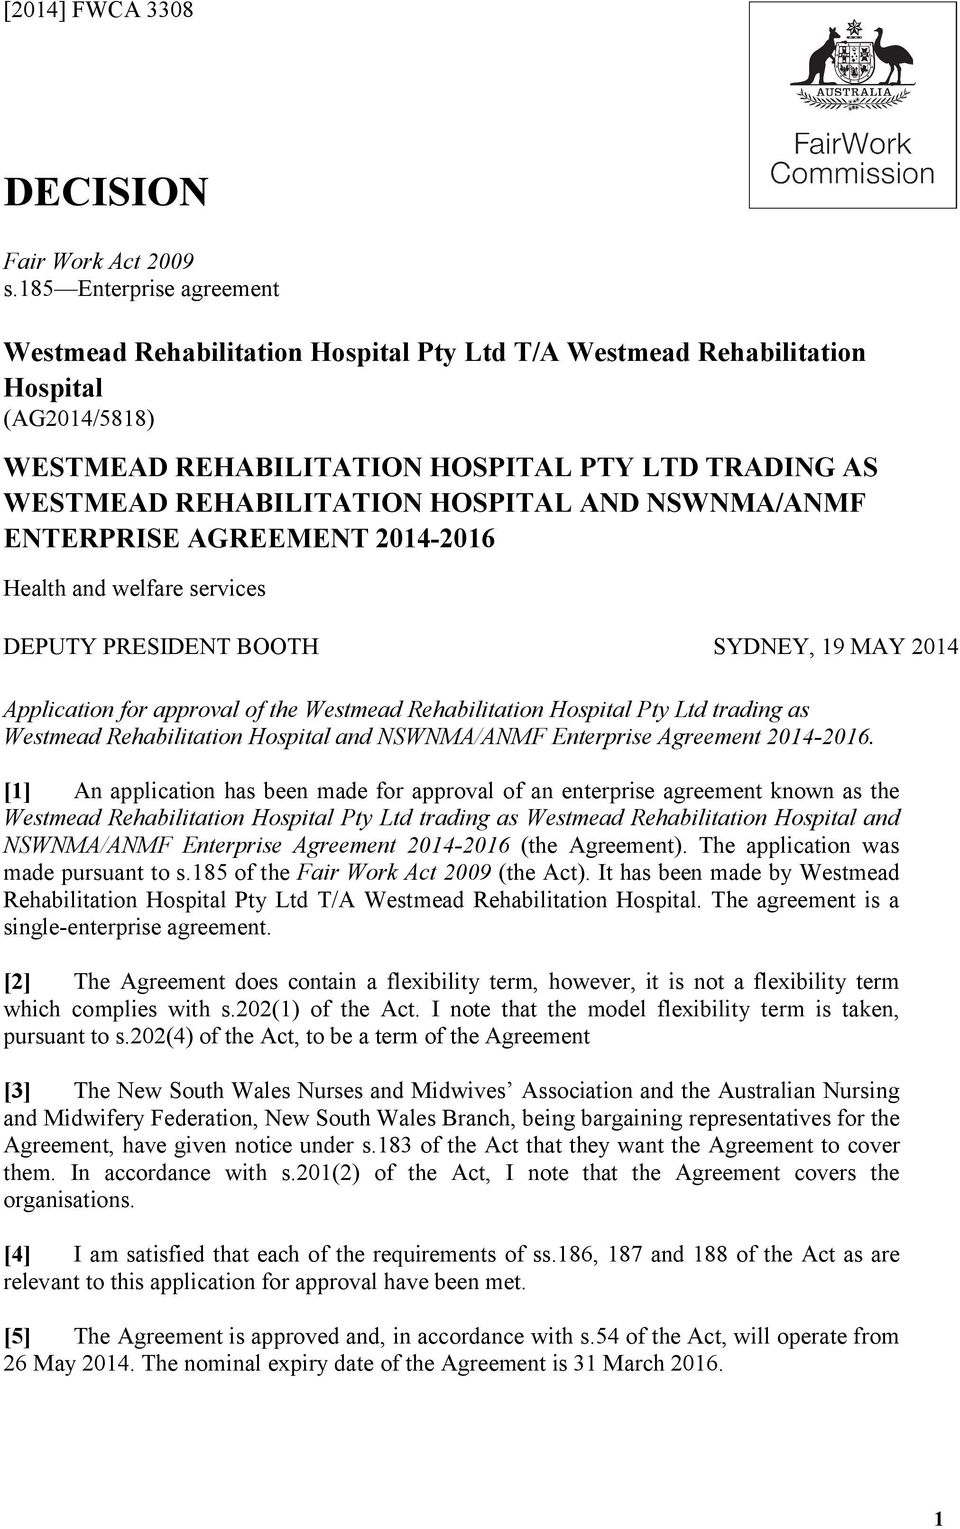 HOSPITAL AND NSWNMA/ANMF ENTERPRISE AGREEMENT 2014-2016 Health and welfare services DEPUTY PRESIDENT BOOTH SYDNEY, 19 MAY 2014 Application for approval of the Westmead Rehabilitation Hospital Pty Ltd